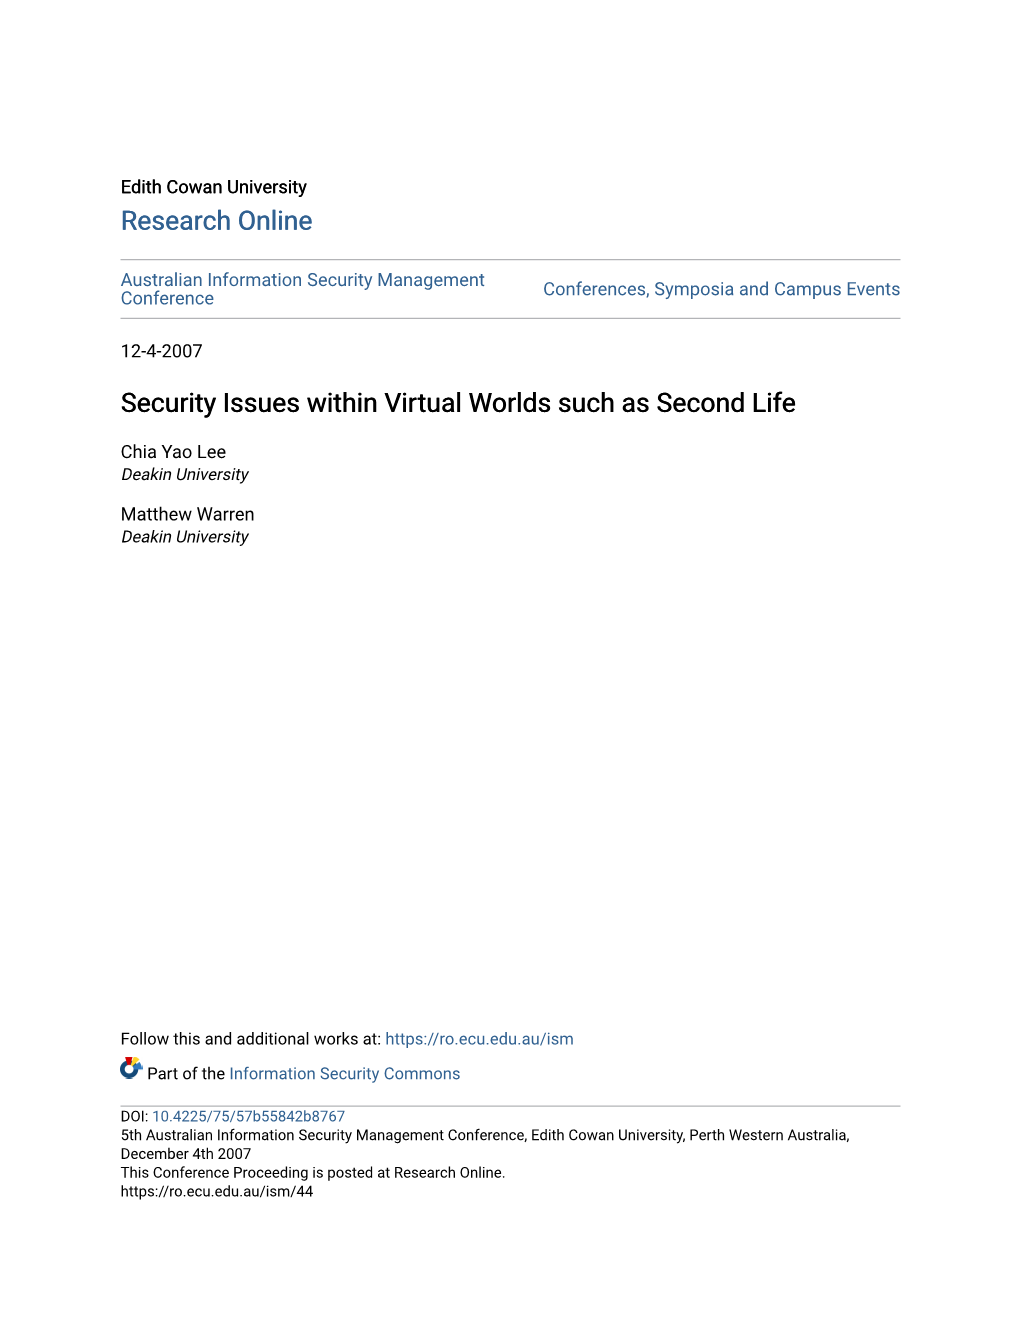 Security Issues Within Virtual Worlds Such As Second Life